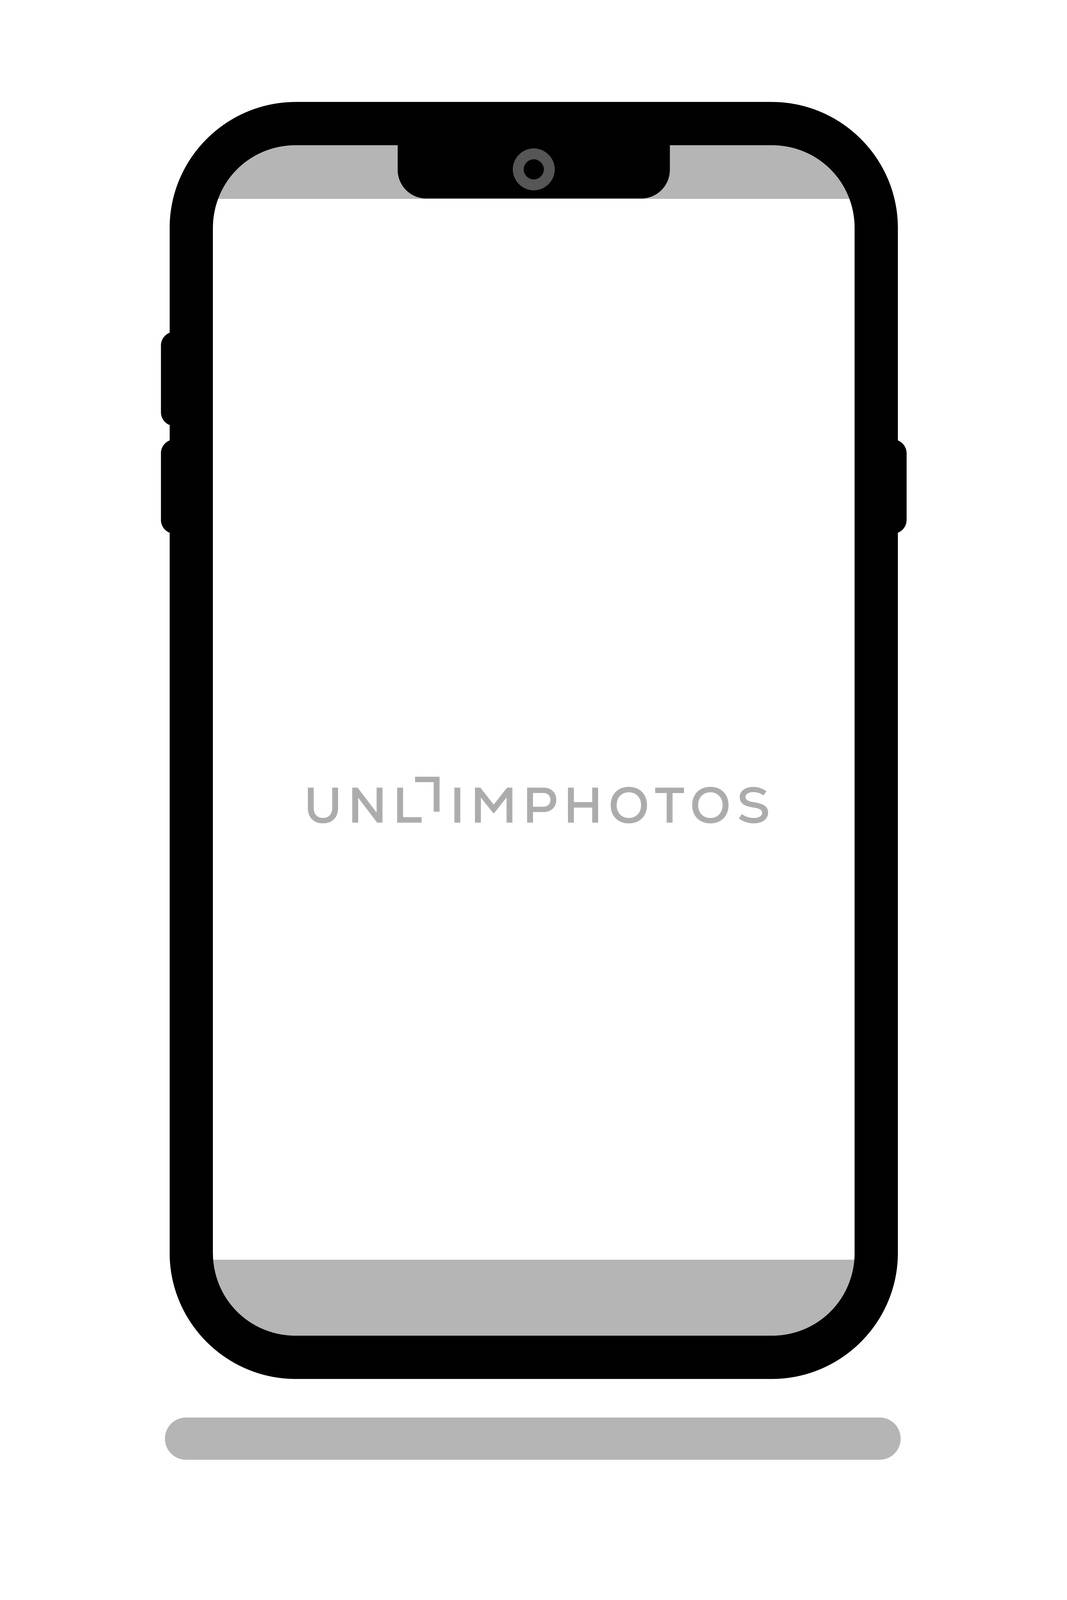 An illustration of a typical smartphone with space for your content